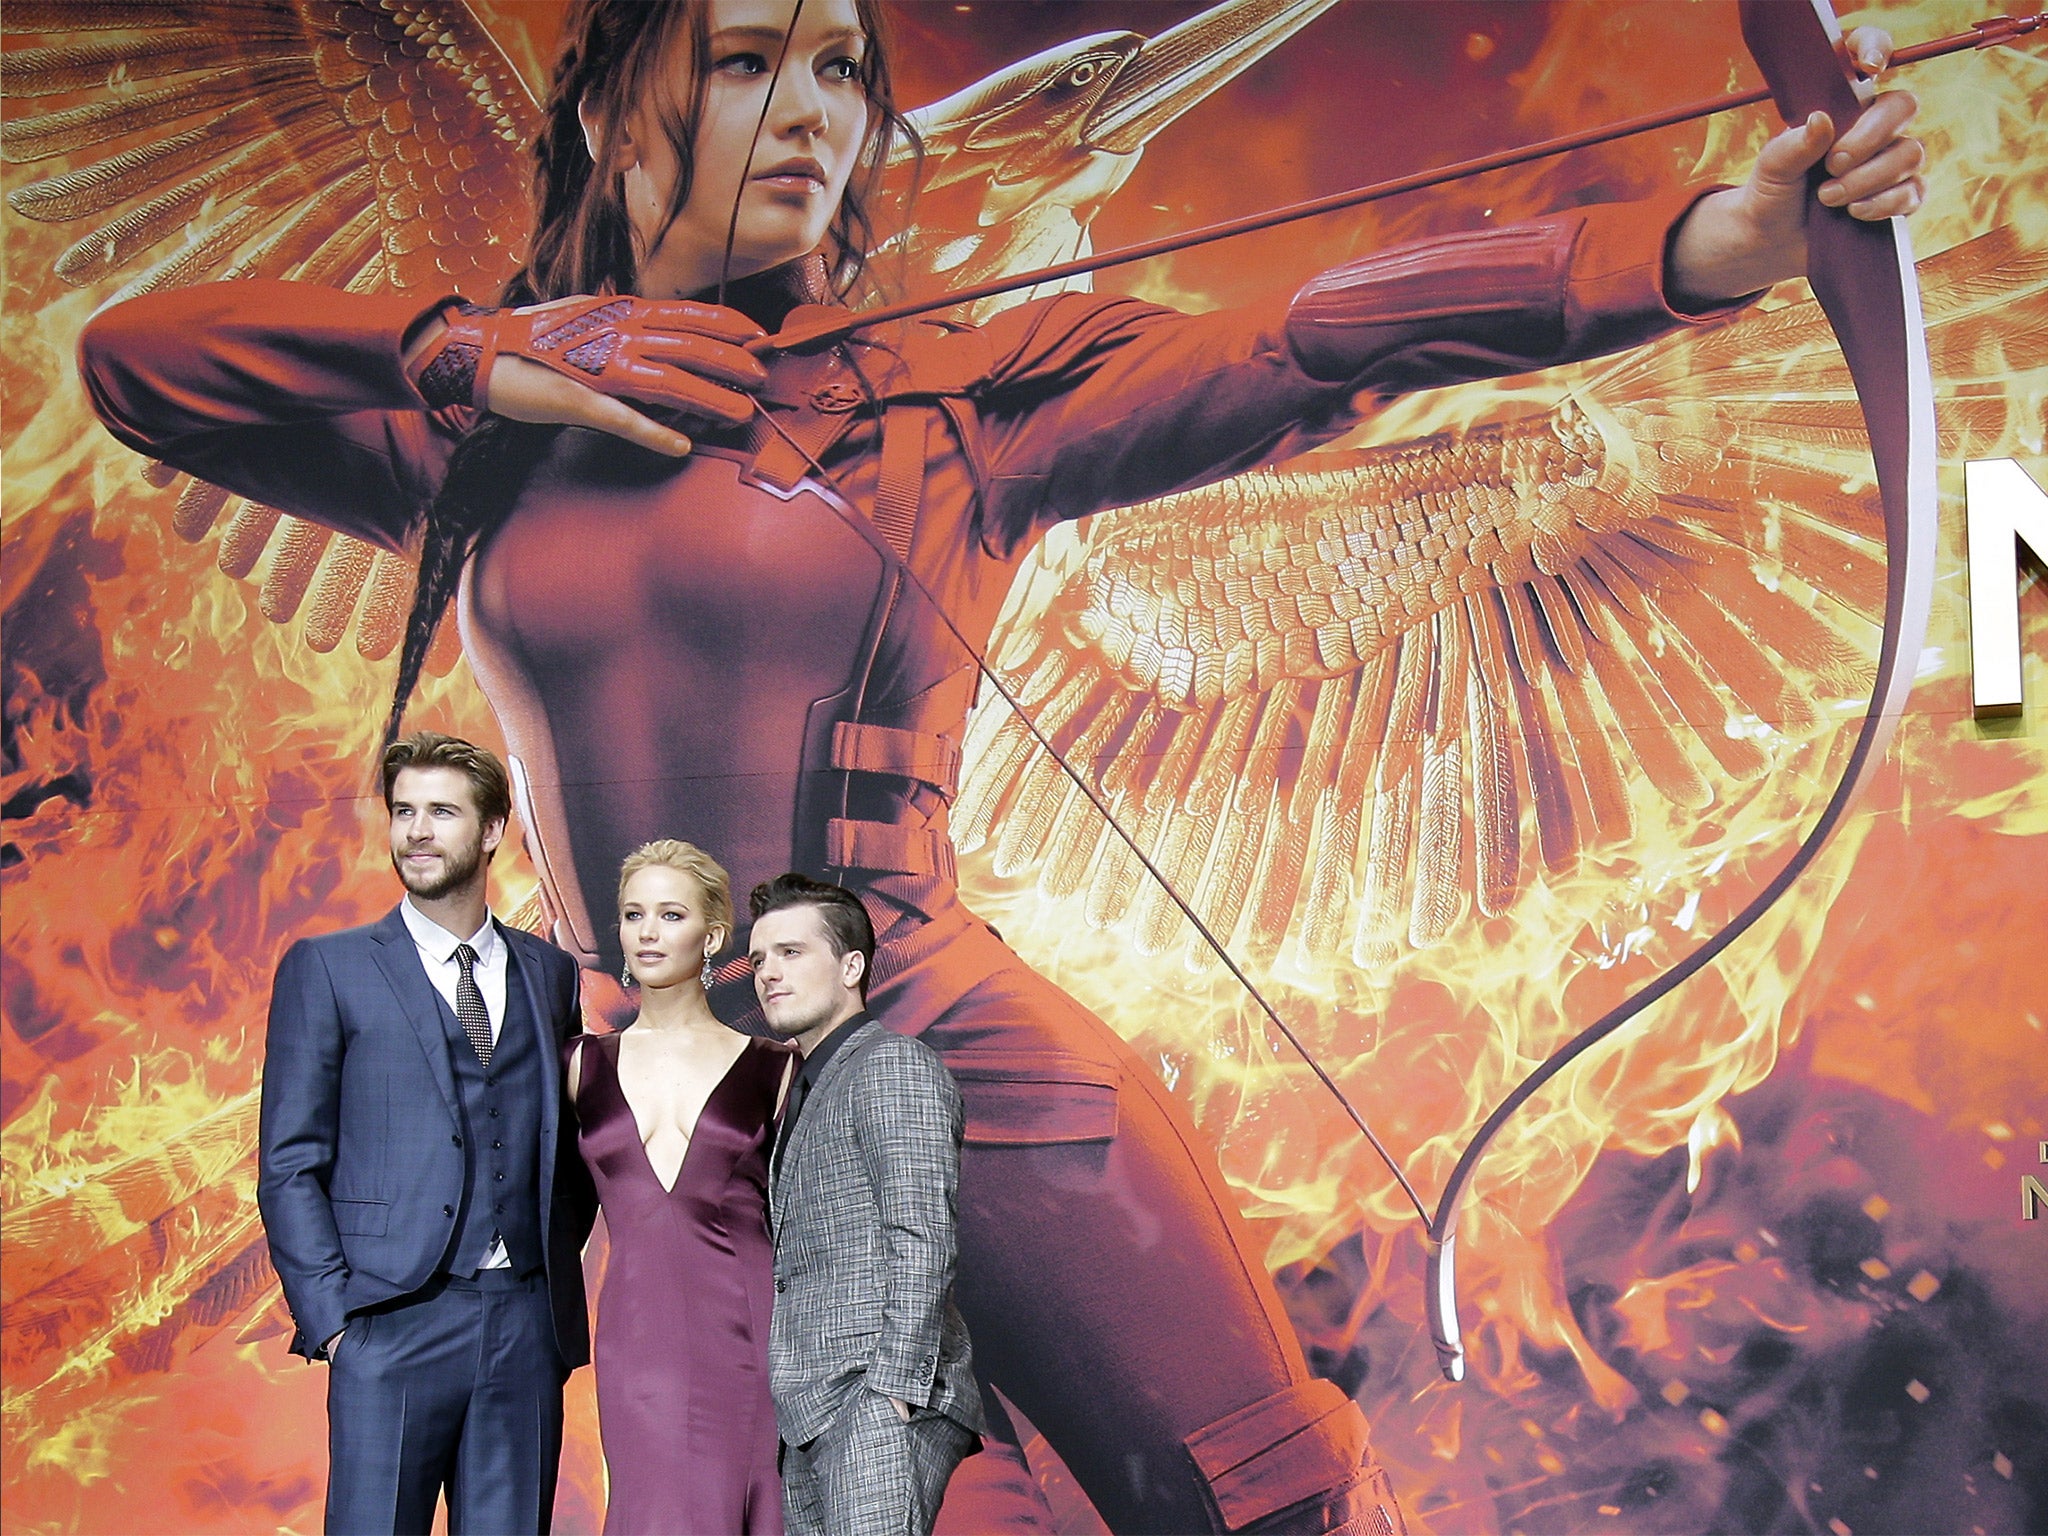 Photos from The Hunger Games: Mockingjay Part 2 Premieres - E